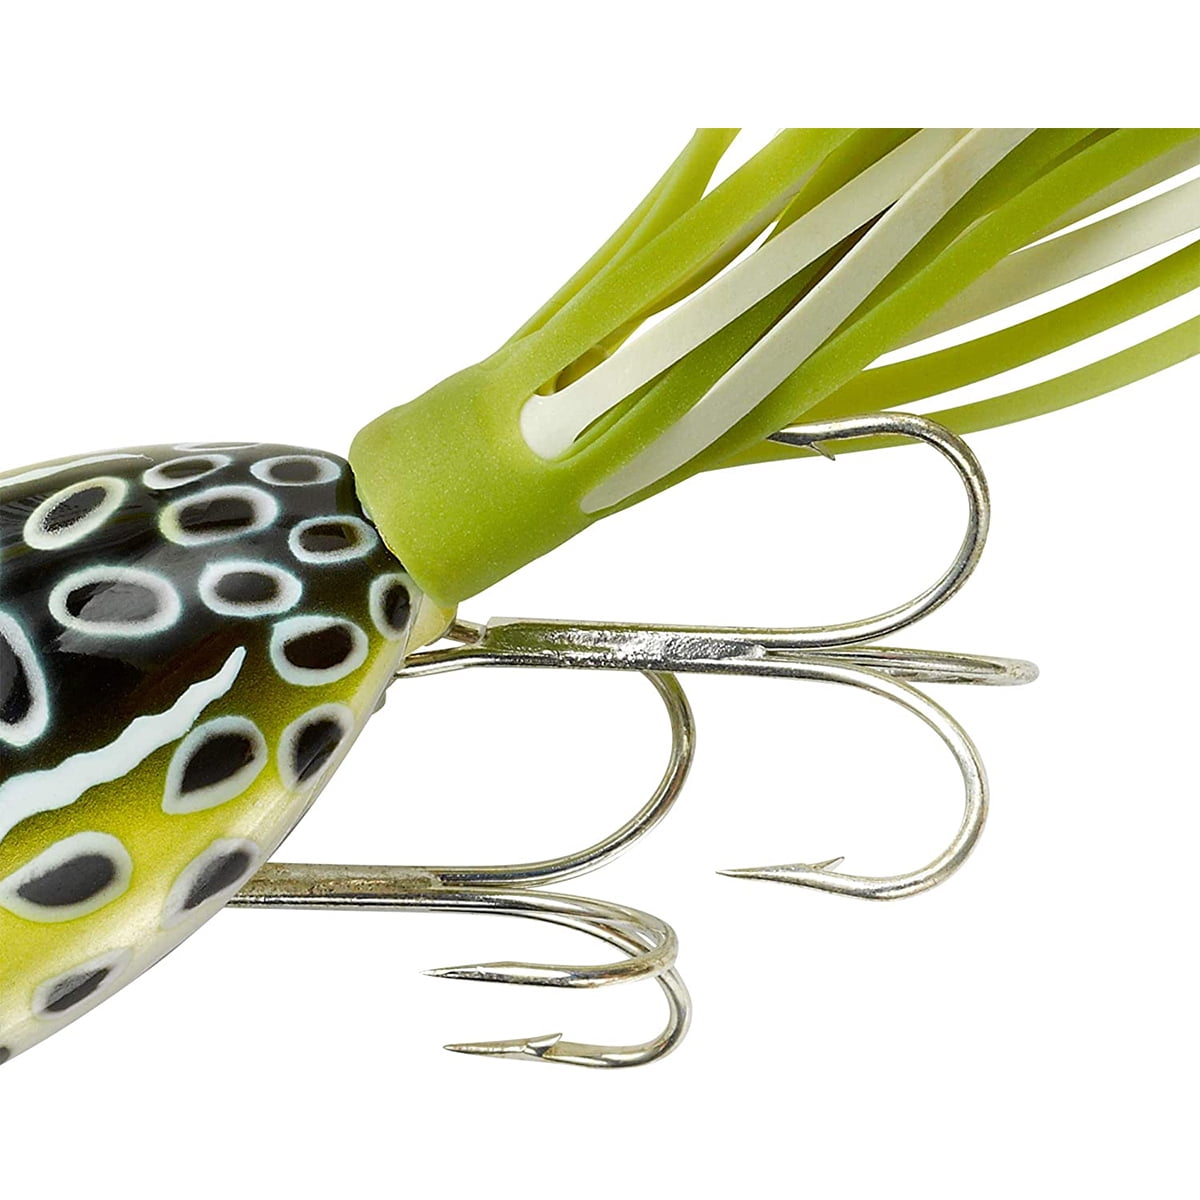 Arbogast 5/8 oz ARBO-GASTER Fishing Lure • LUM YLW COACHDOG – Toad Tackle